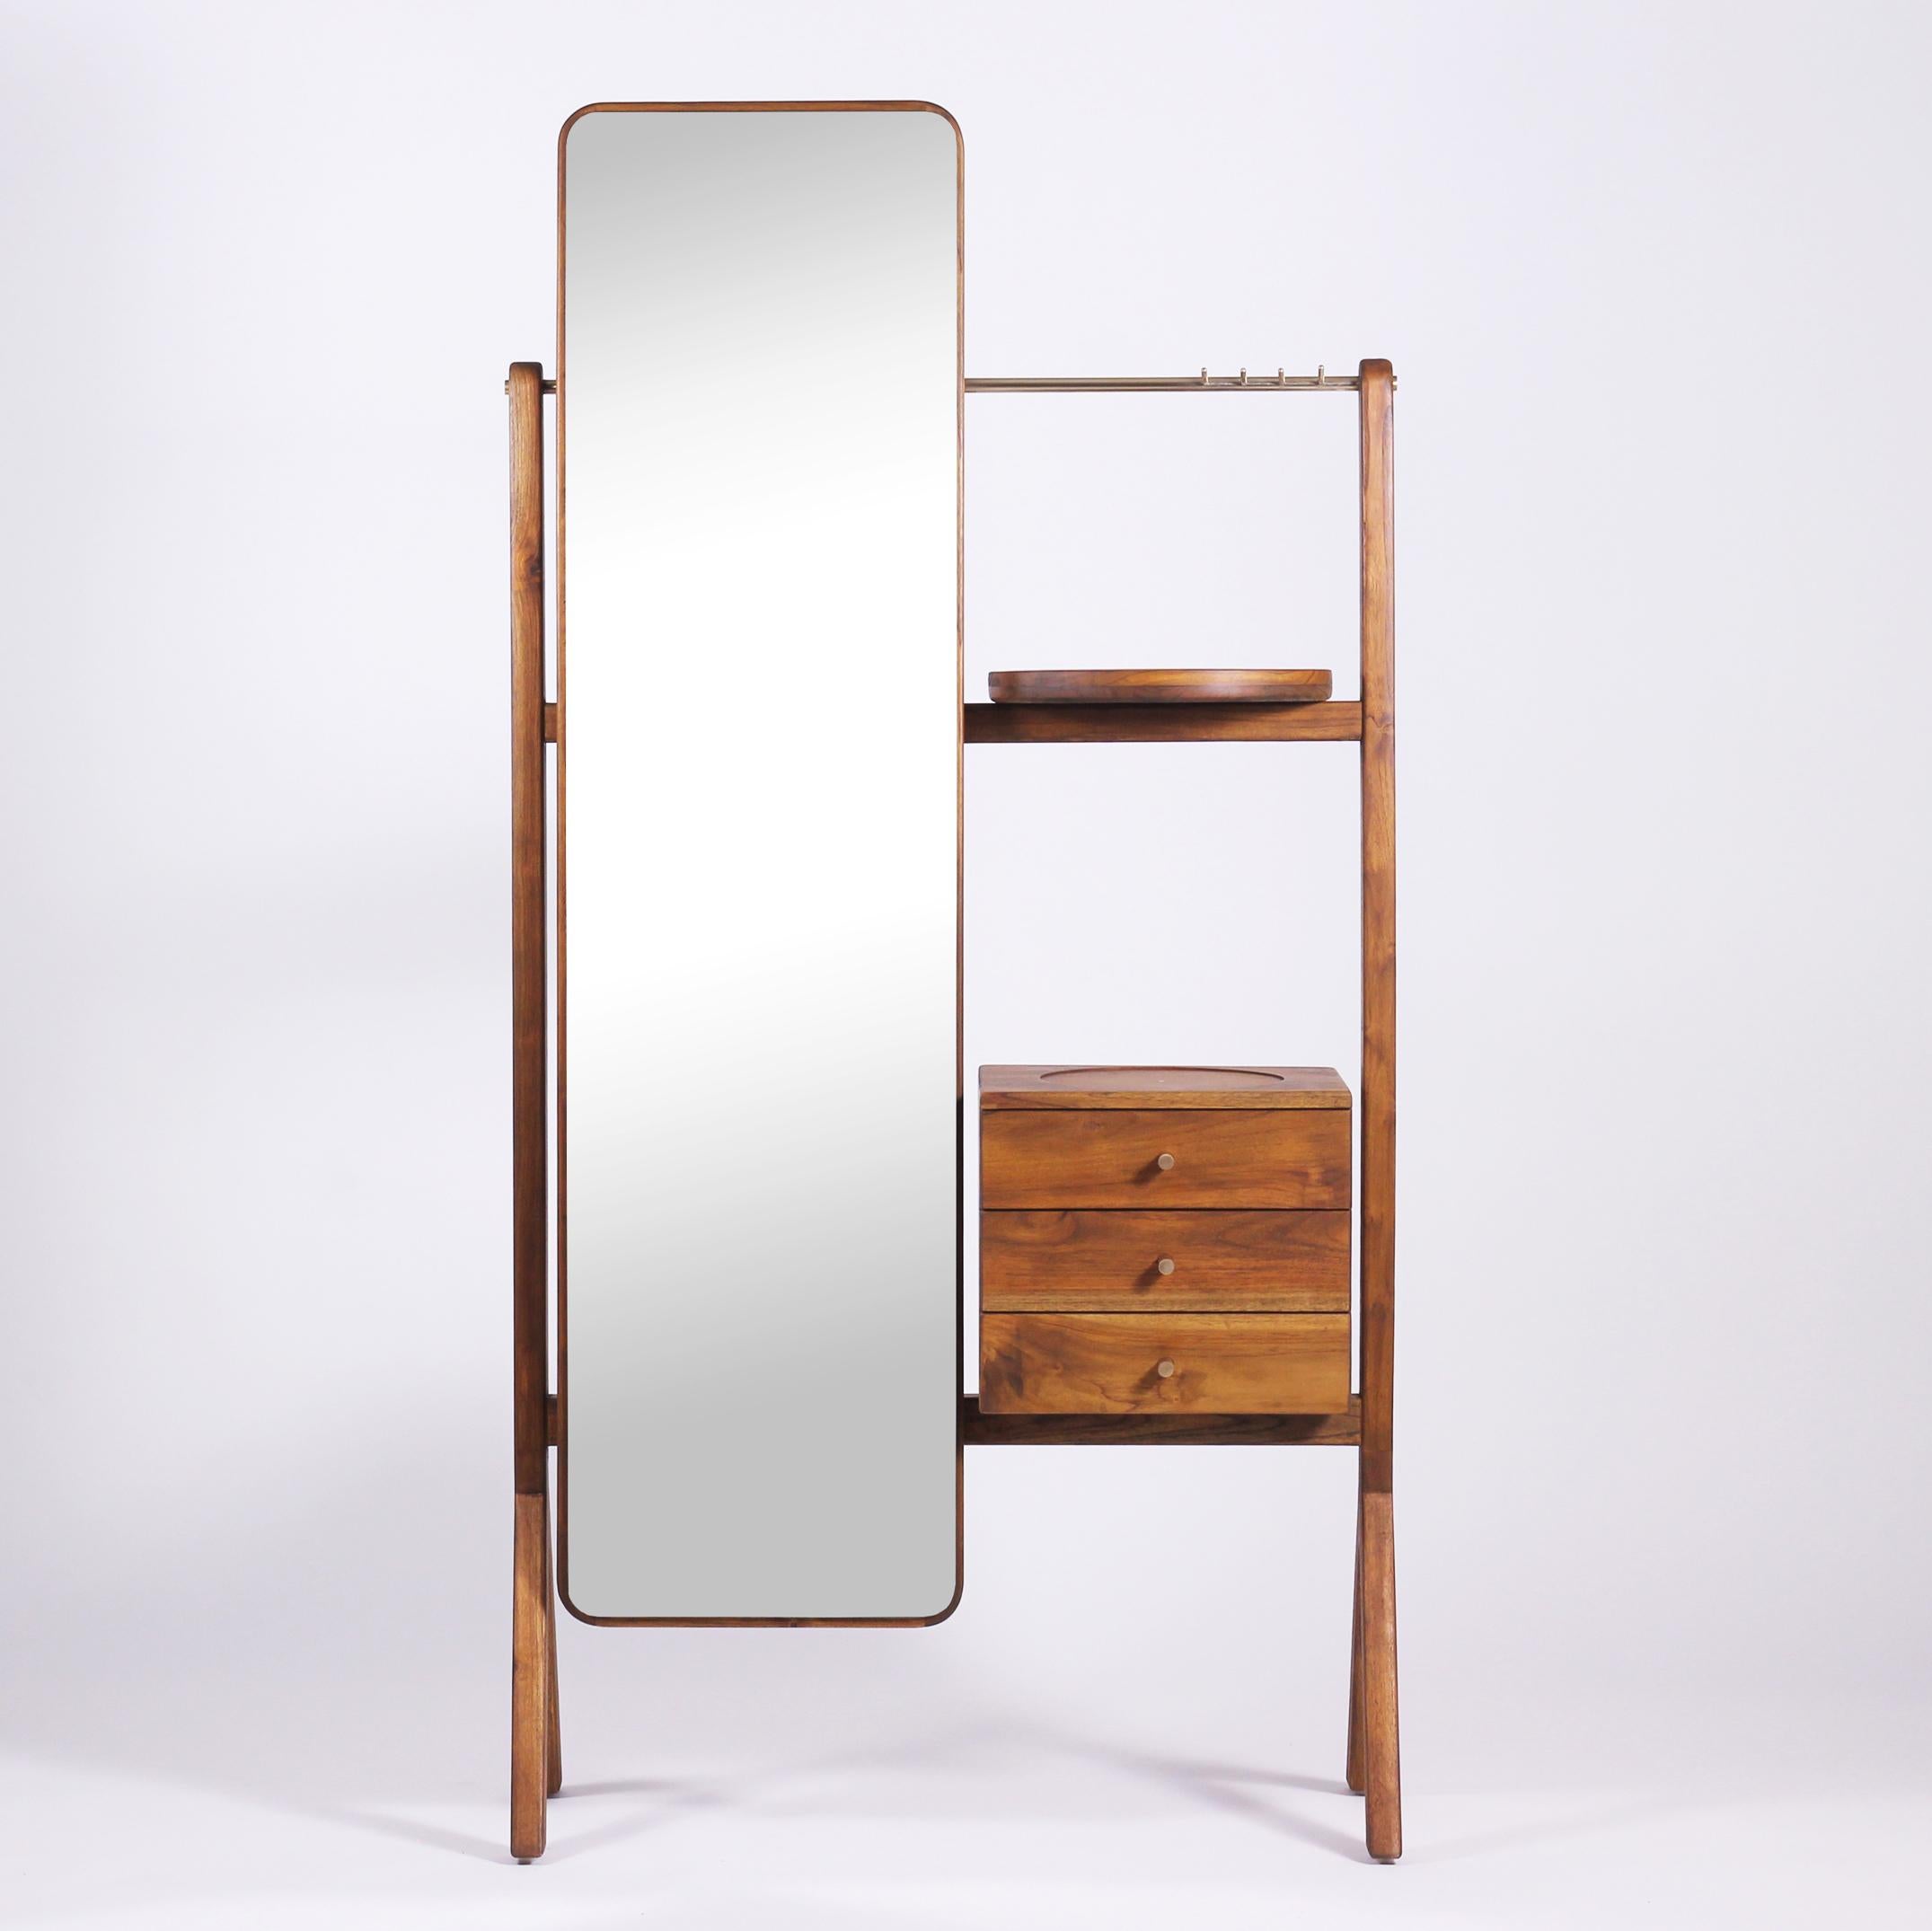 Cleopatra dressing unit by Esvee Atelier
Dimensions: D 40 x W 90 x H 180 cm
Mirror dimensions: L 40 x H 155 cm
Materials: Solid teak wood, solid brass, mirrored glass.

Cleopatra dressing unit is designed and made to promote an inspiring and